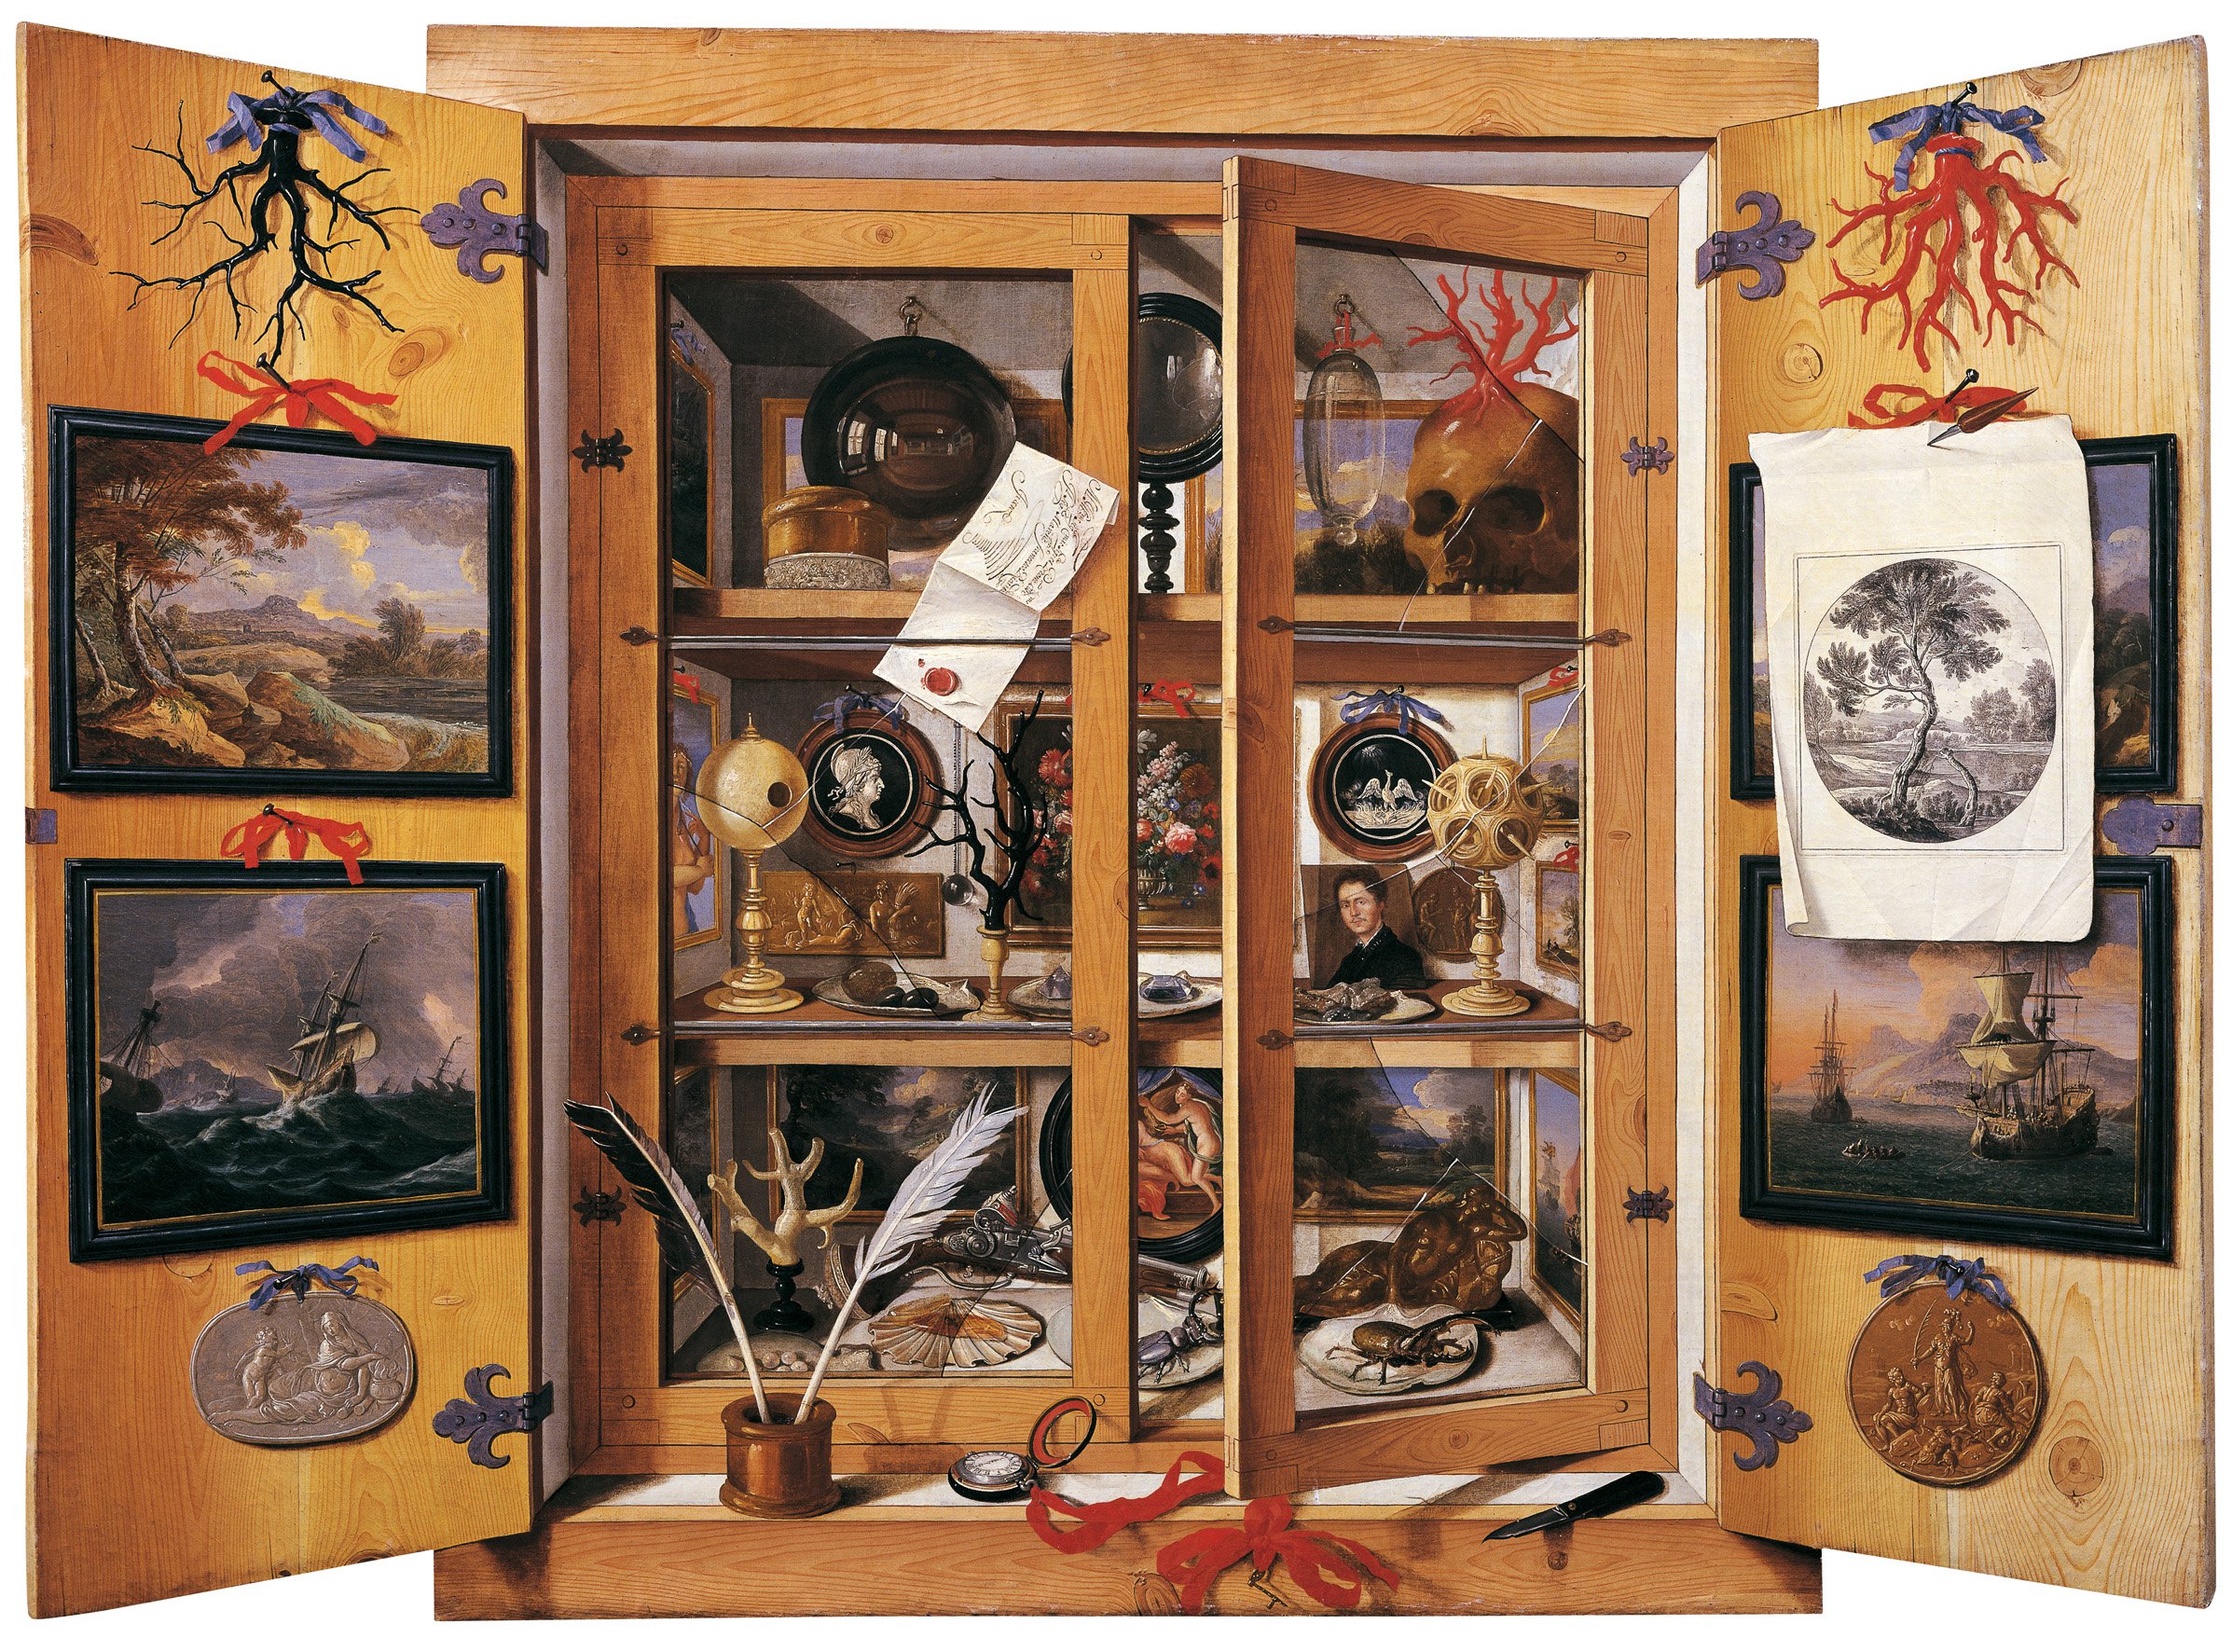 The cabinet of curiosity